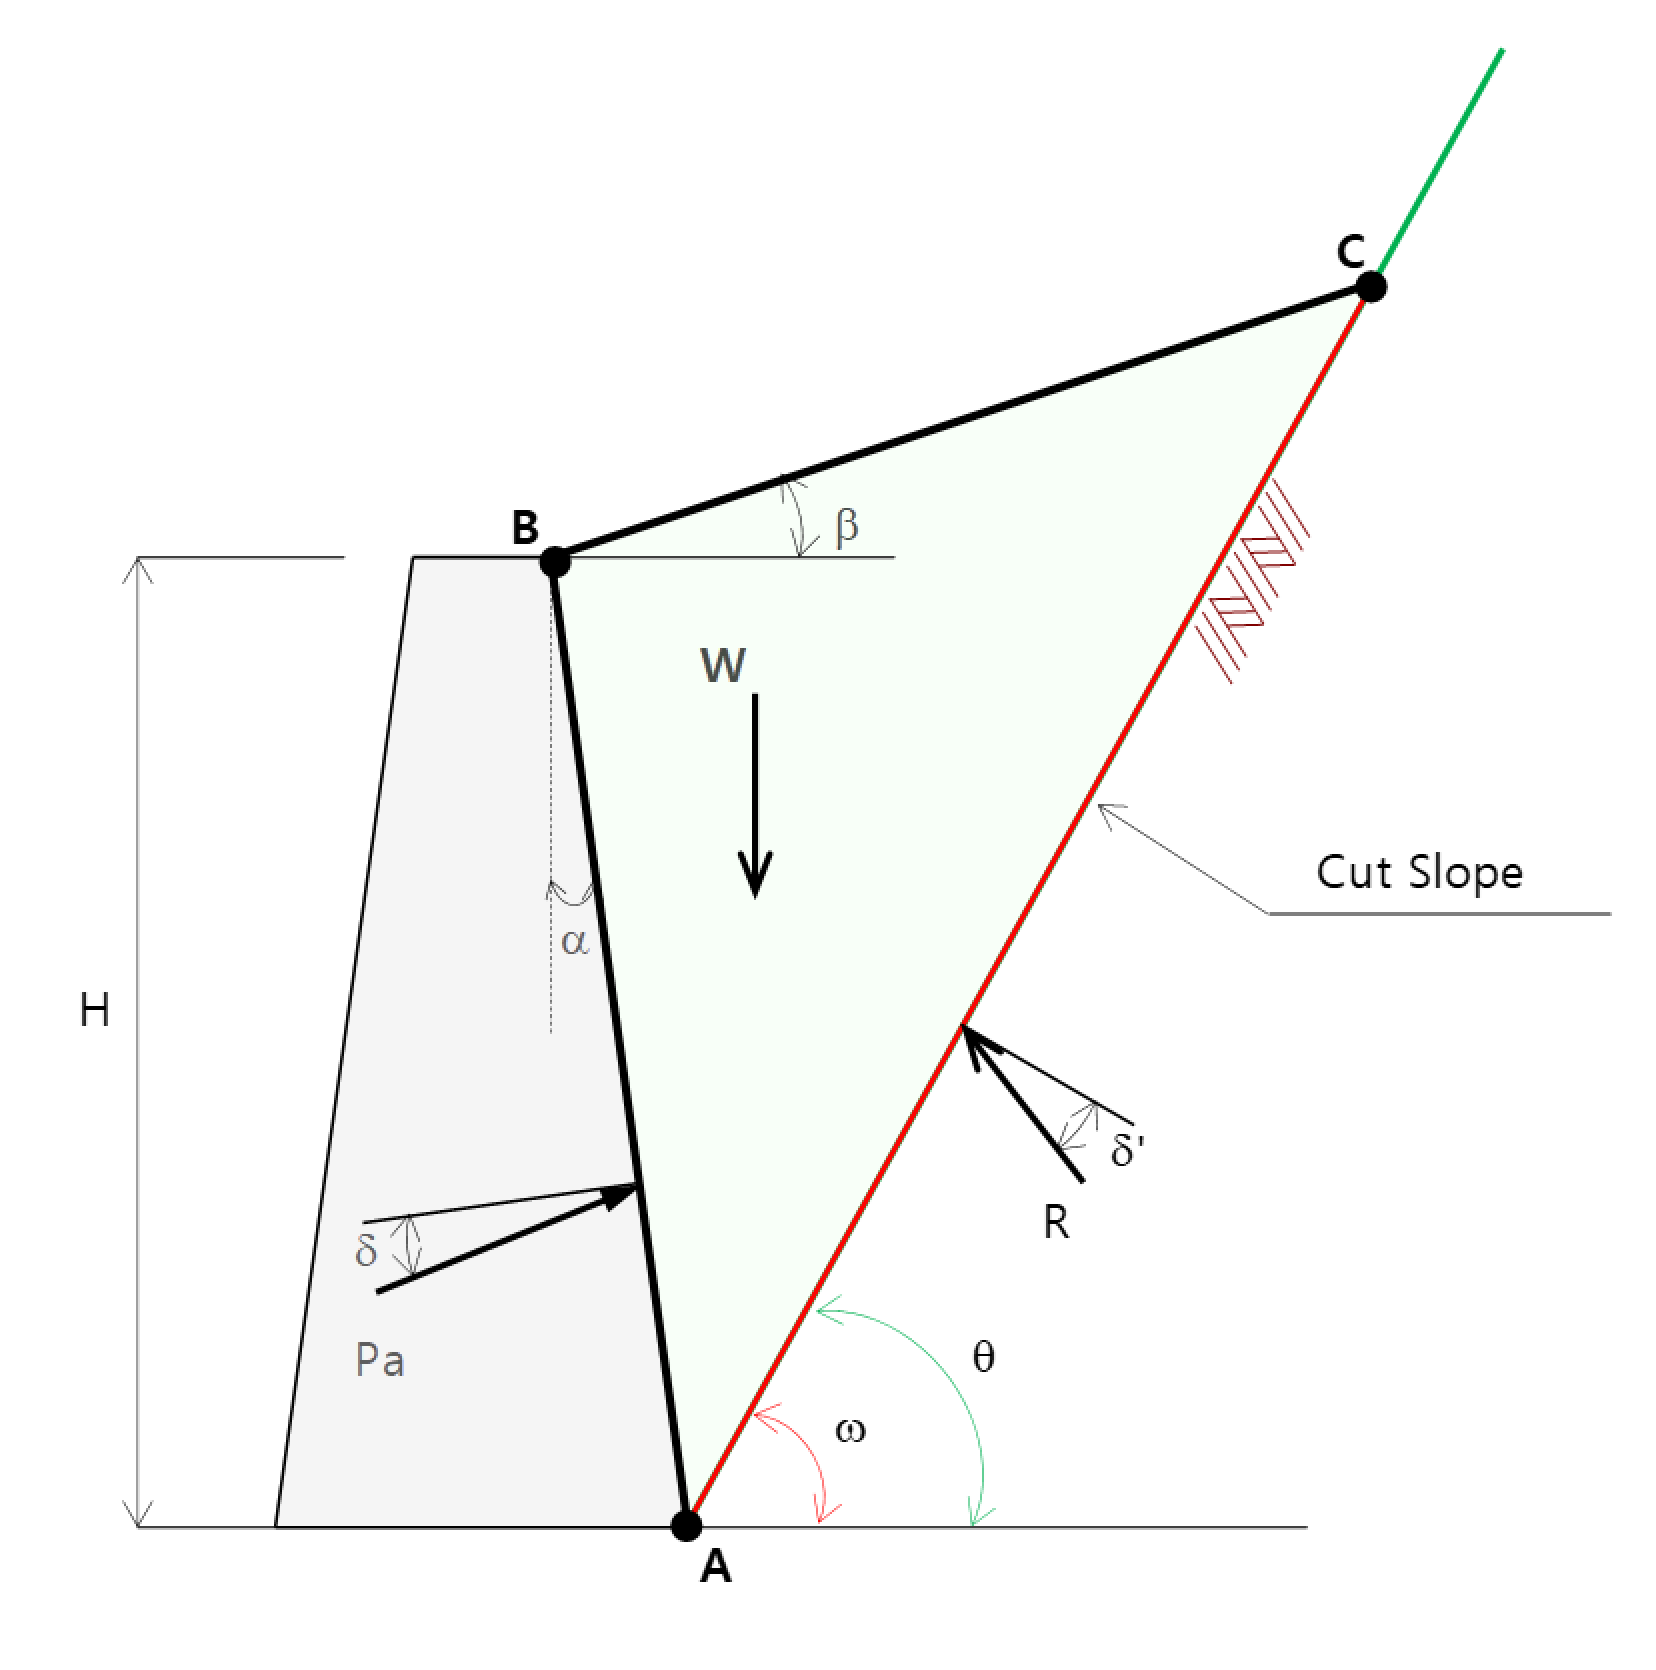 If the angle of failure of the wedge is the same as the slope angle